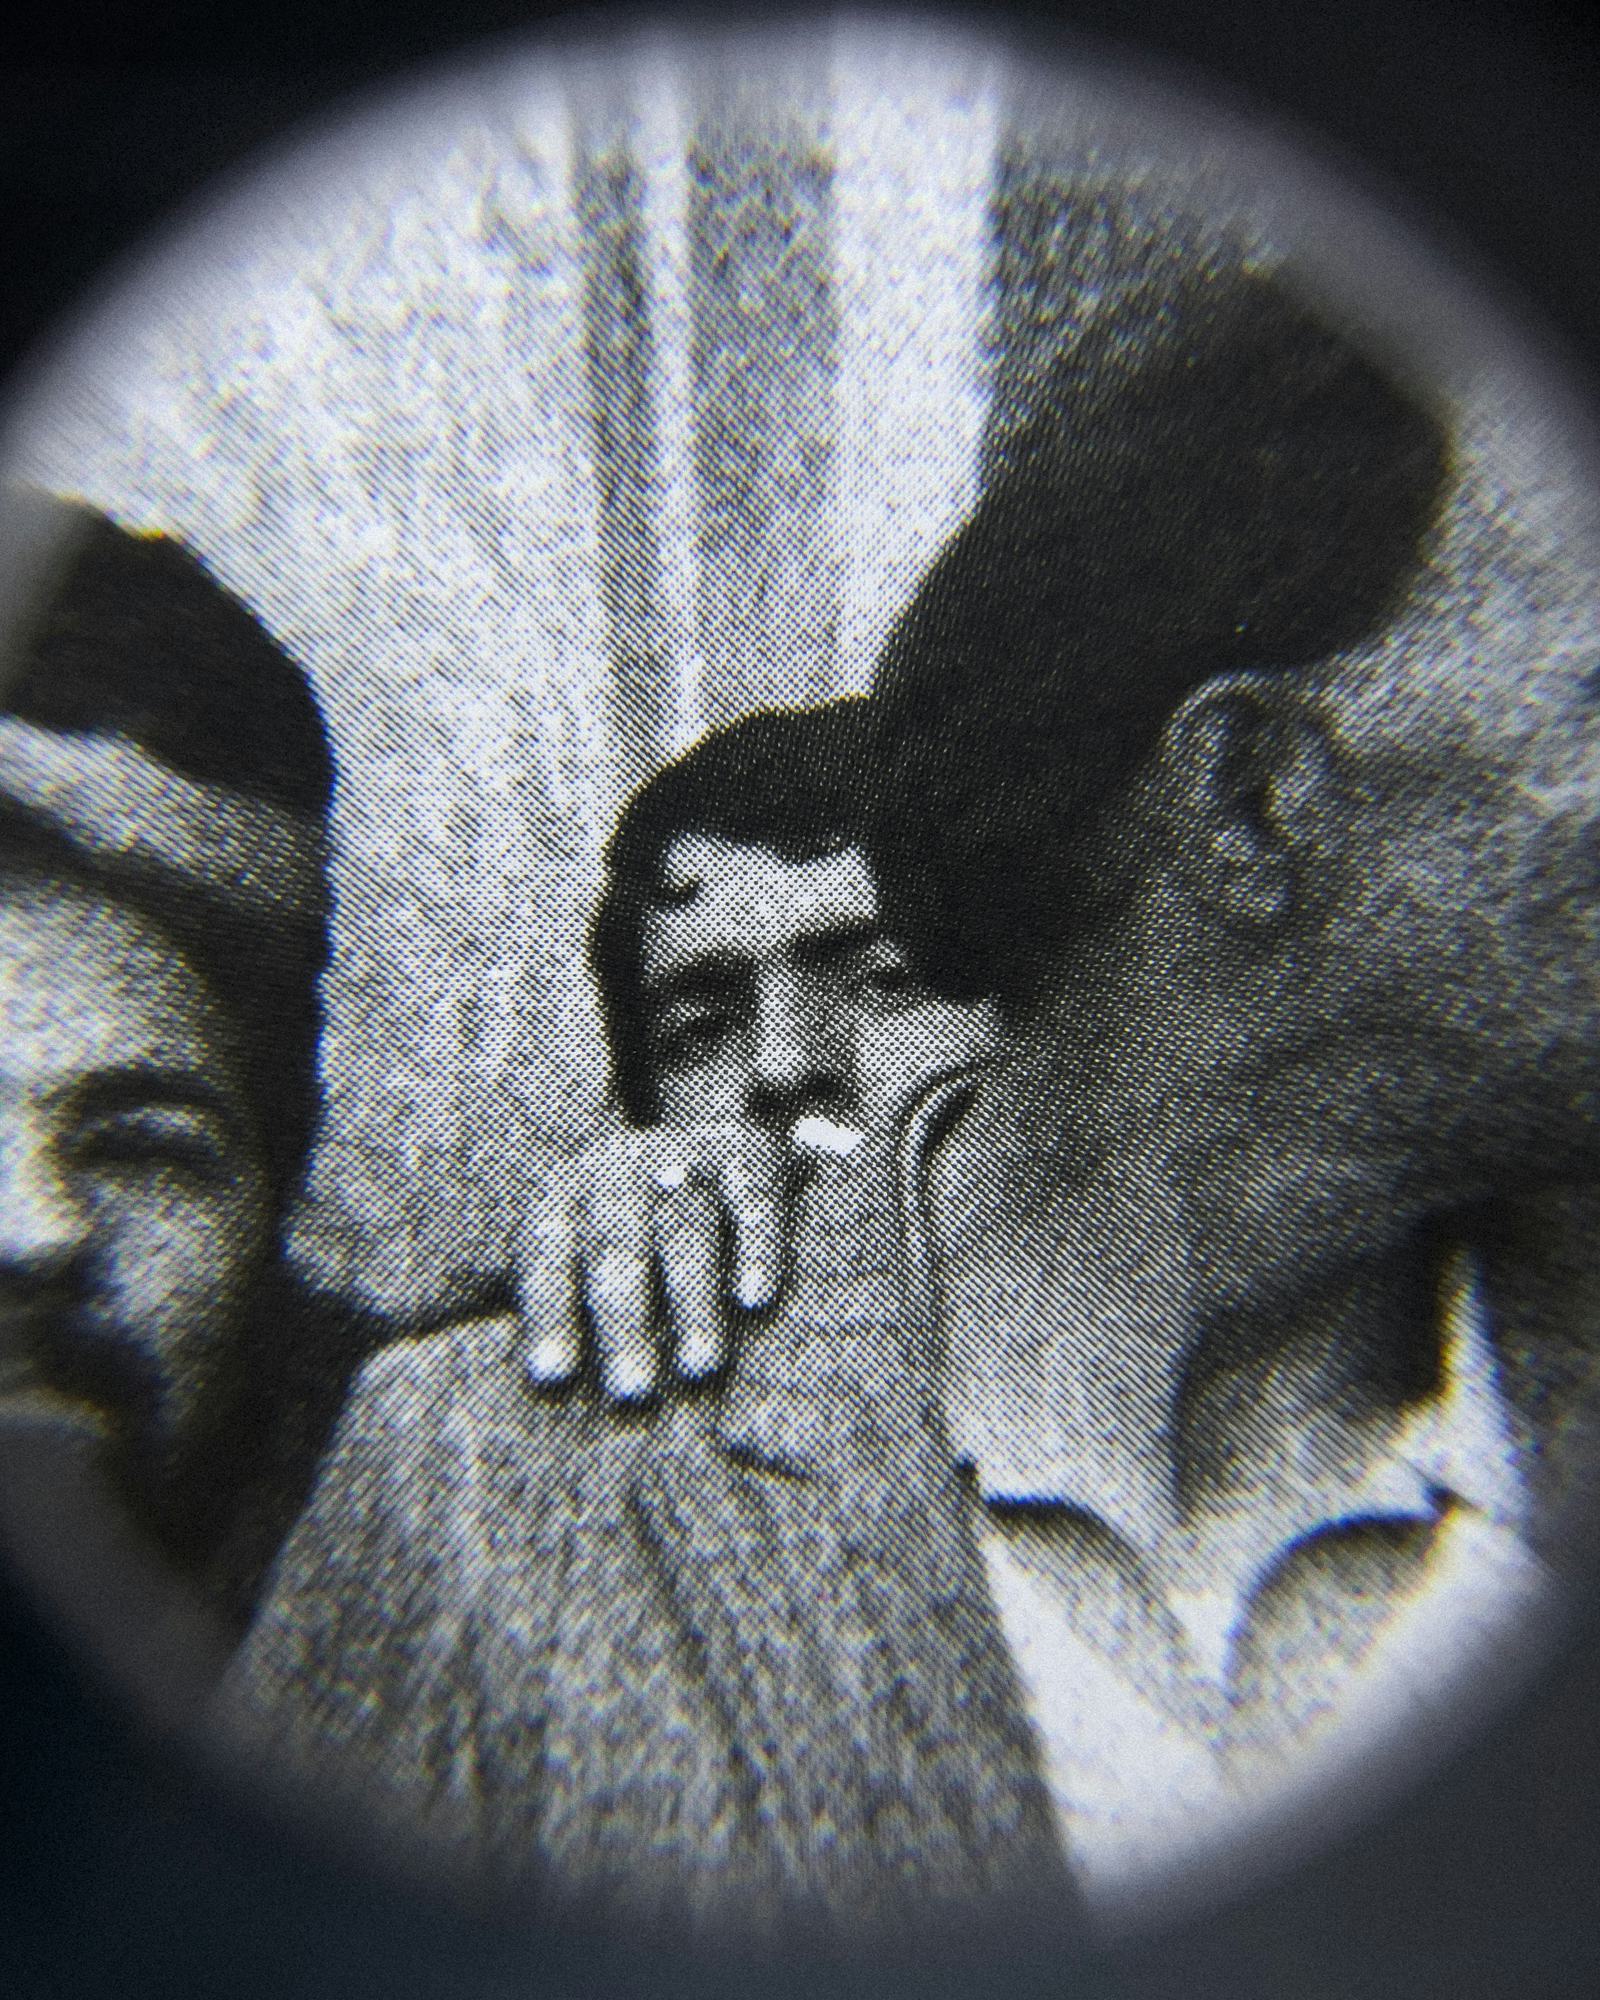 Black and white close-up image of an existing photograph, showing a man peeking into the camera from behind another man. Shot through a magnifying lens © Amin Yousefi